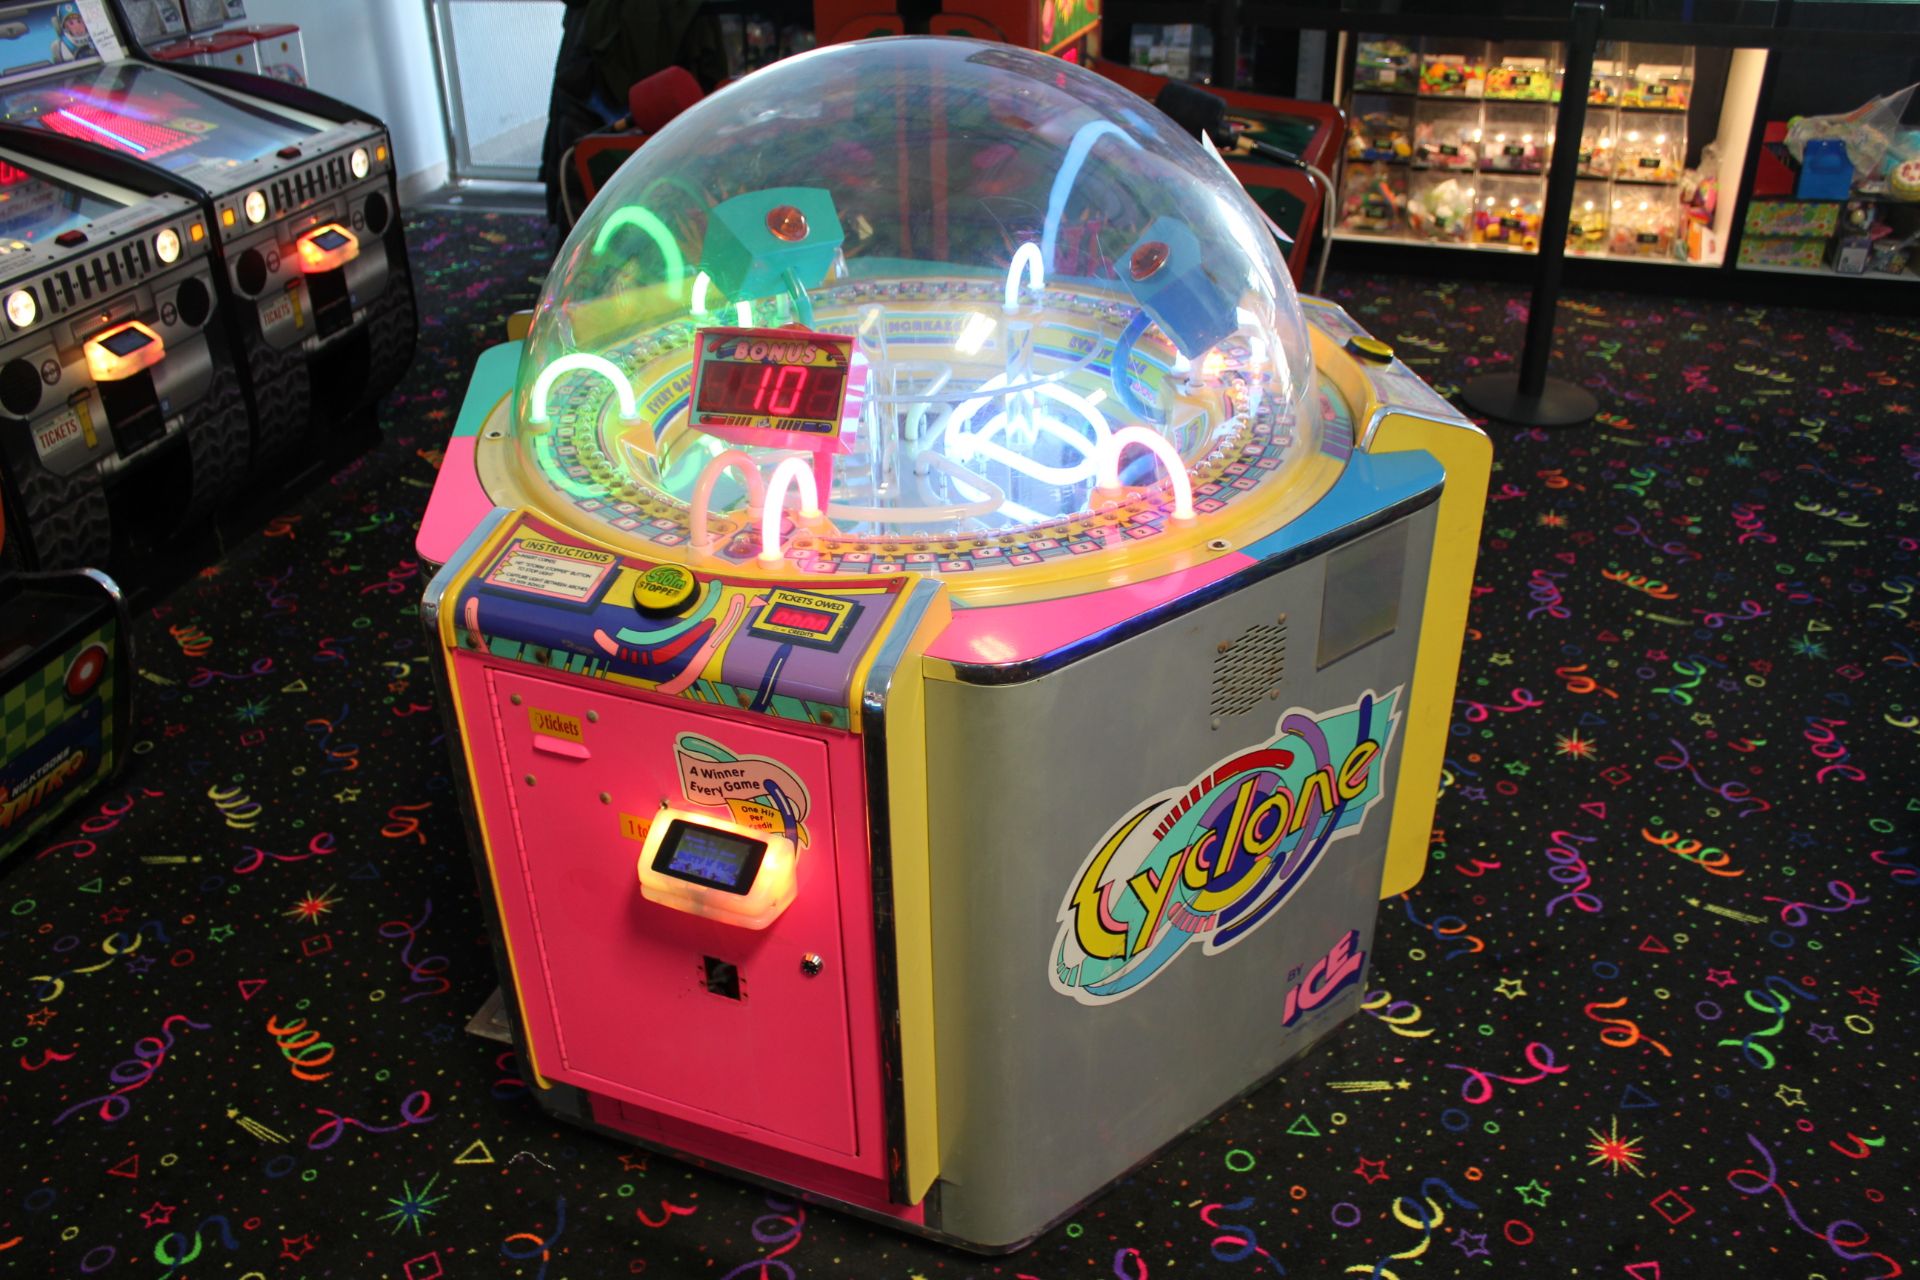 1X, CYCLONE (BY ICE) ARCADE GAME - Image 2 of 4